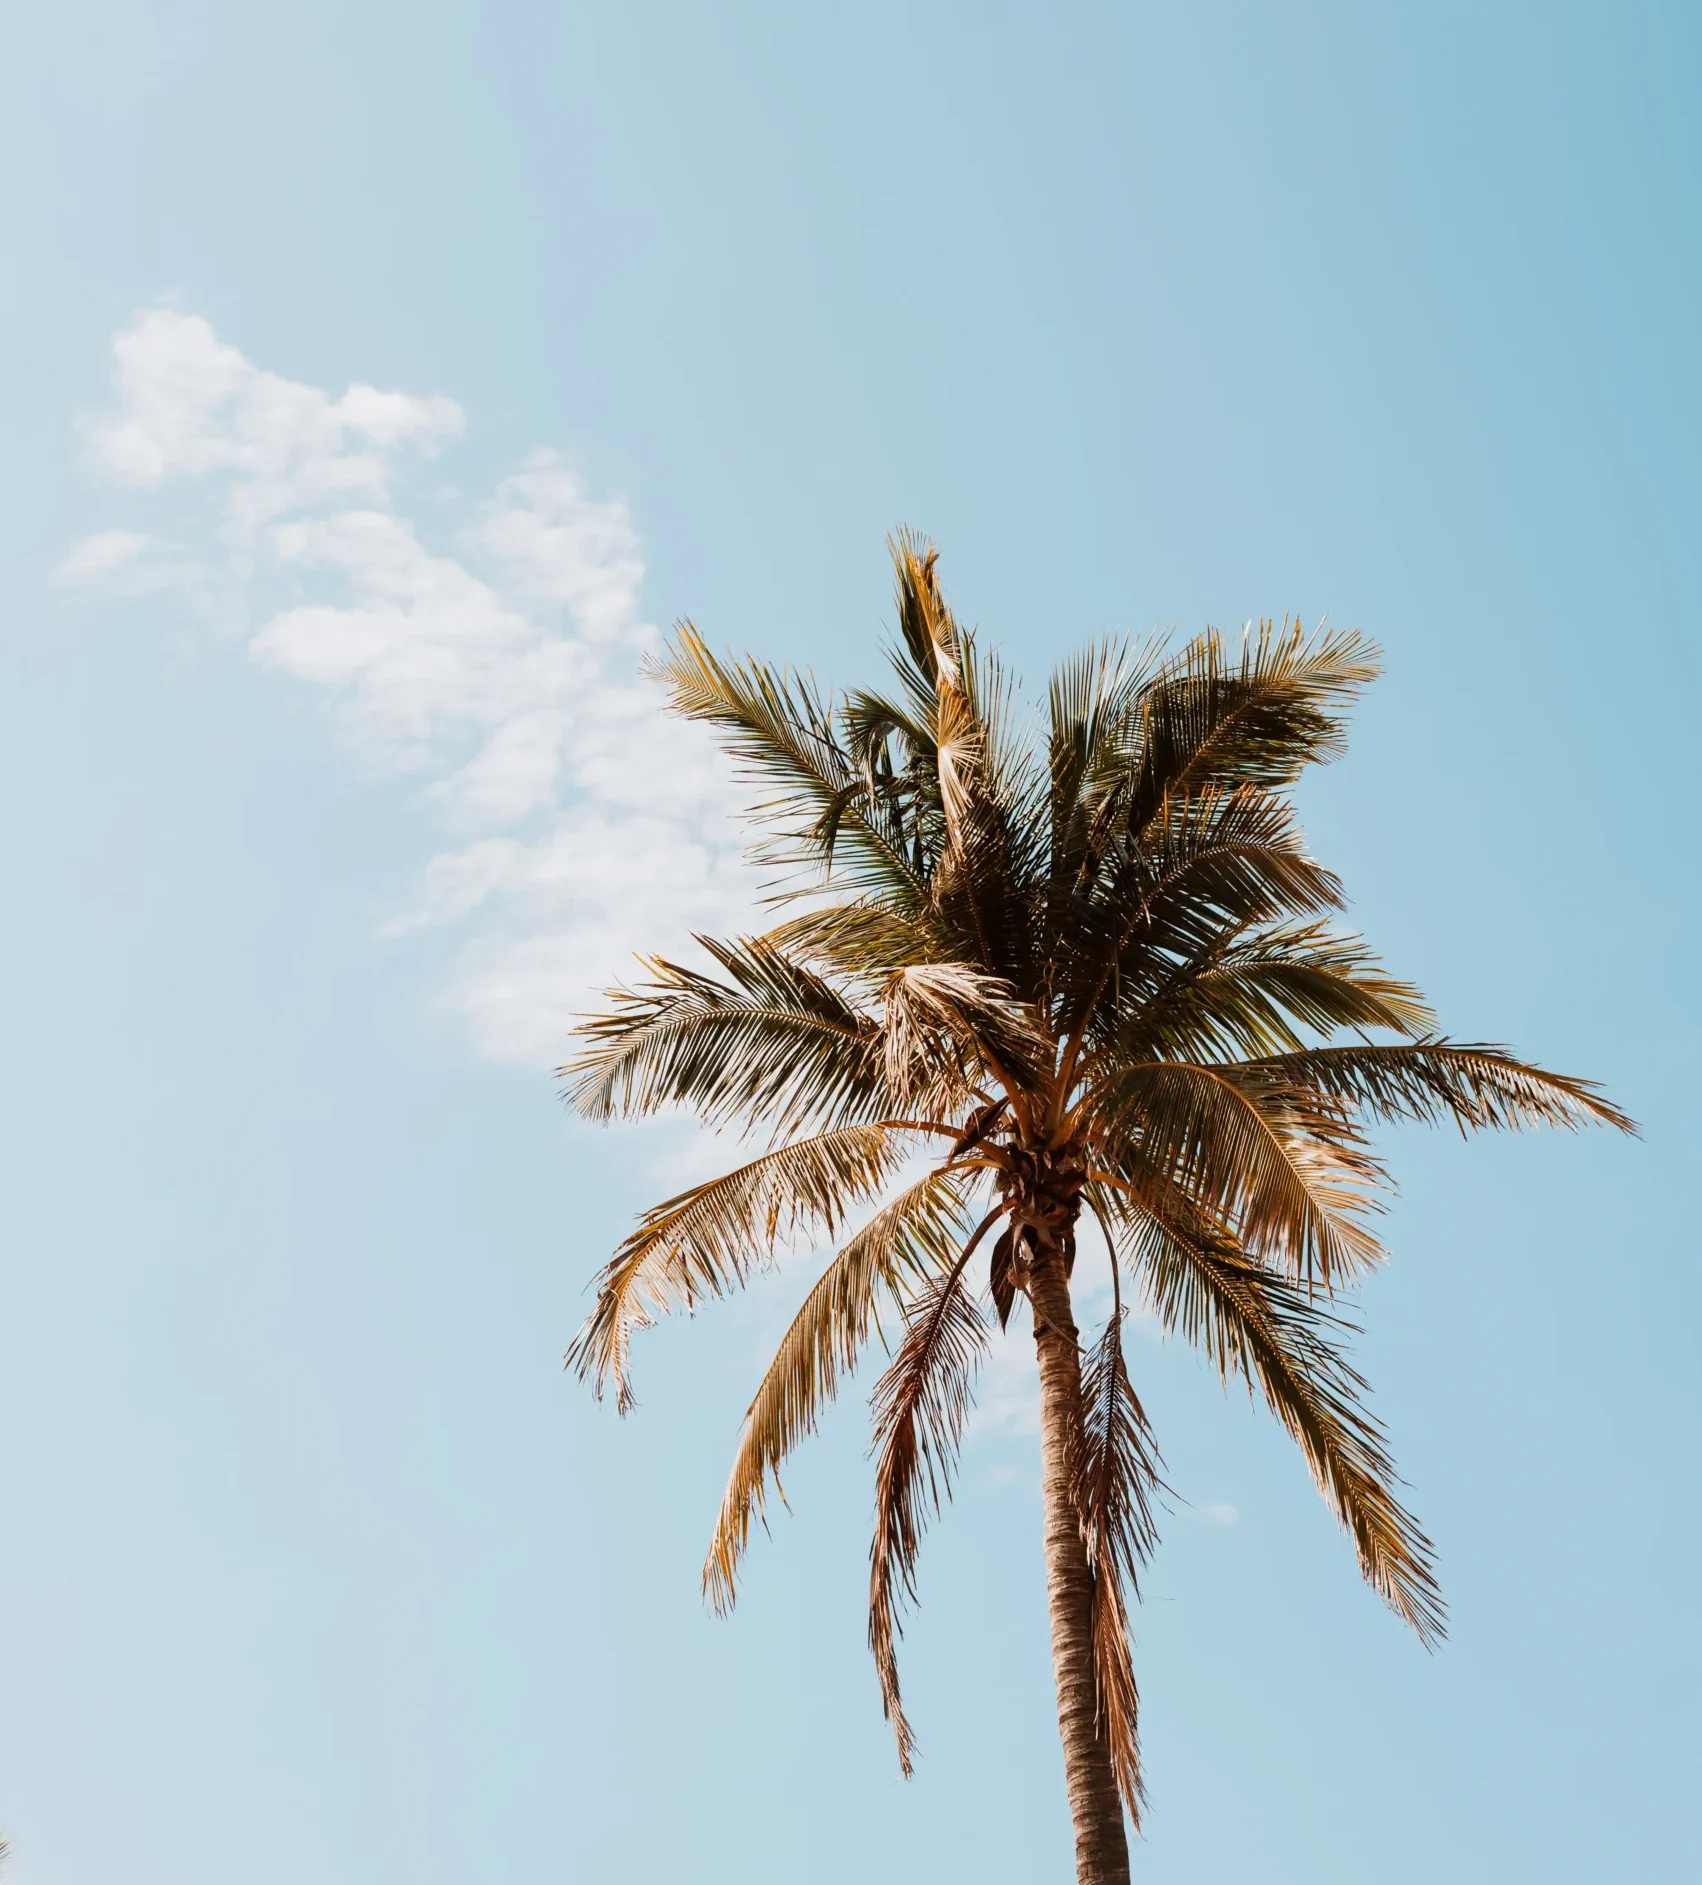 Photo of a palm tree with blue sky in the background